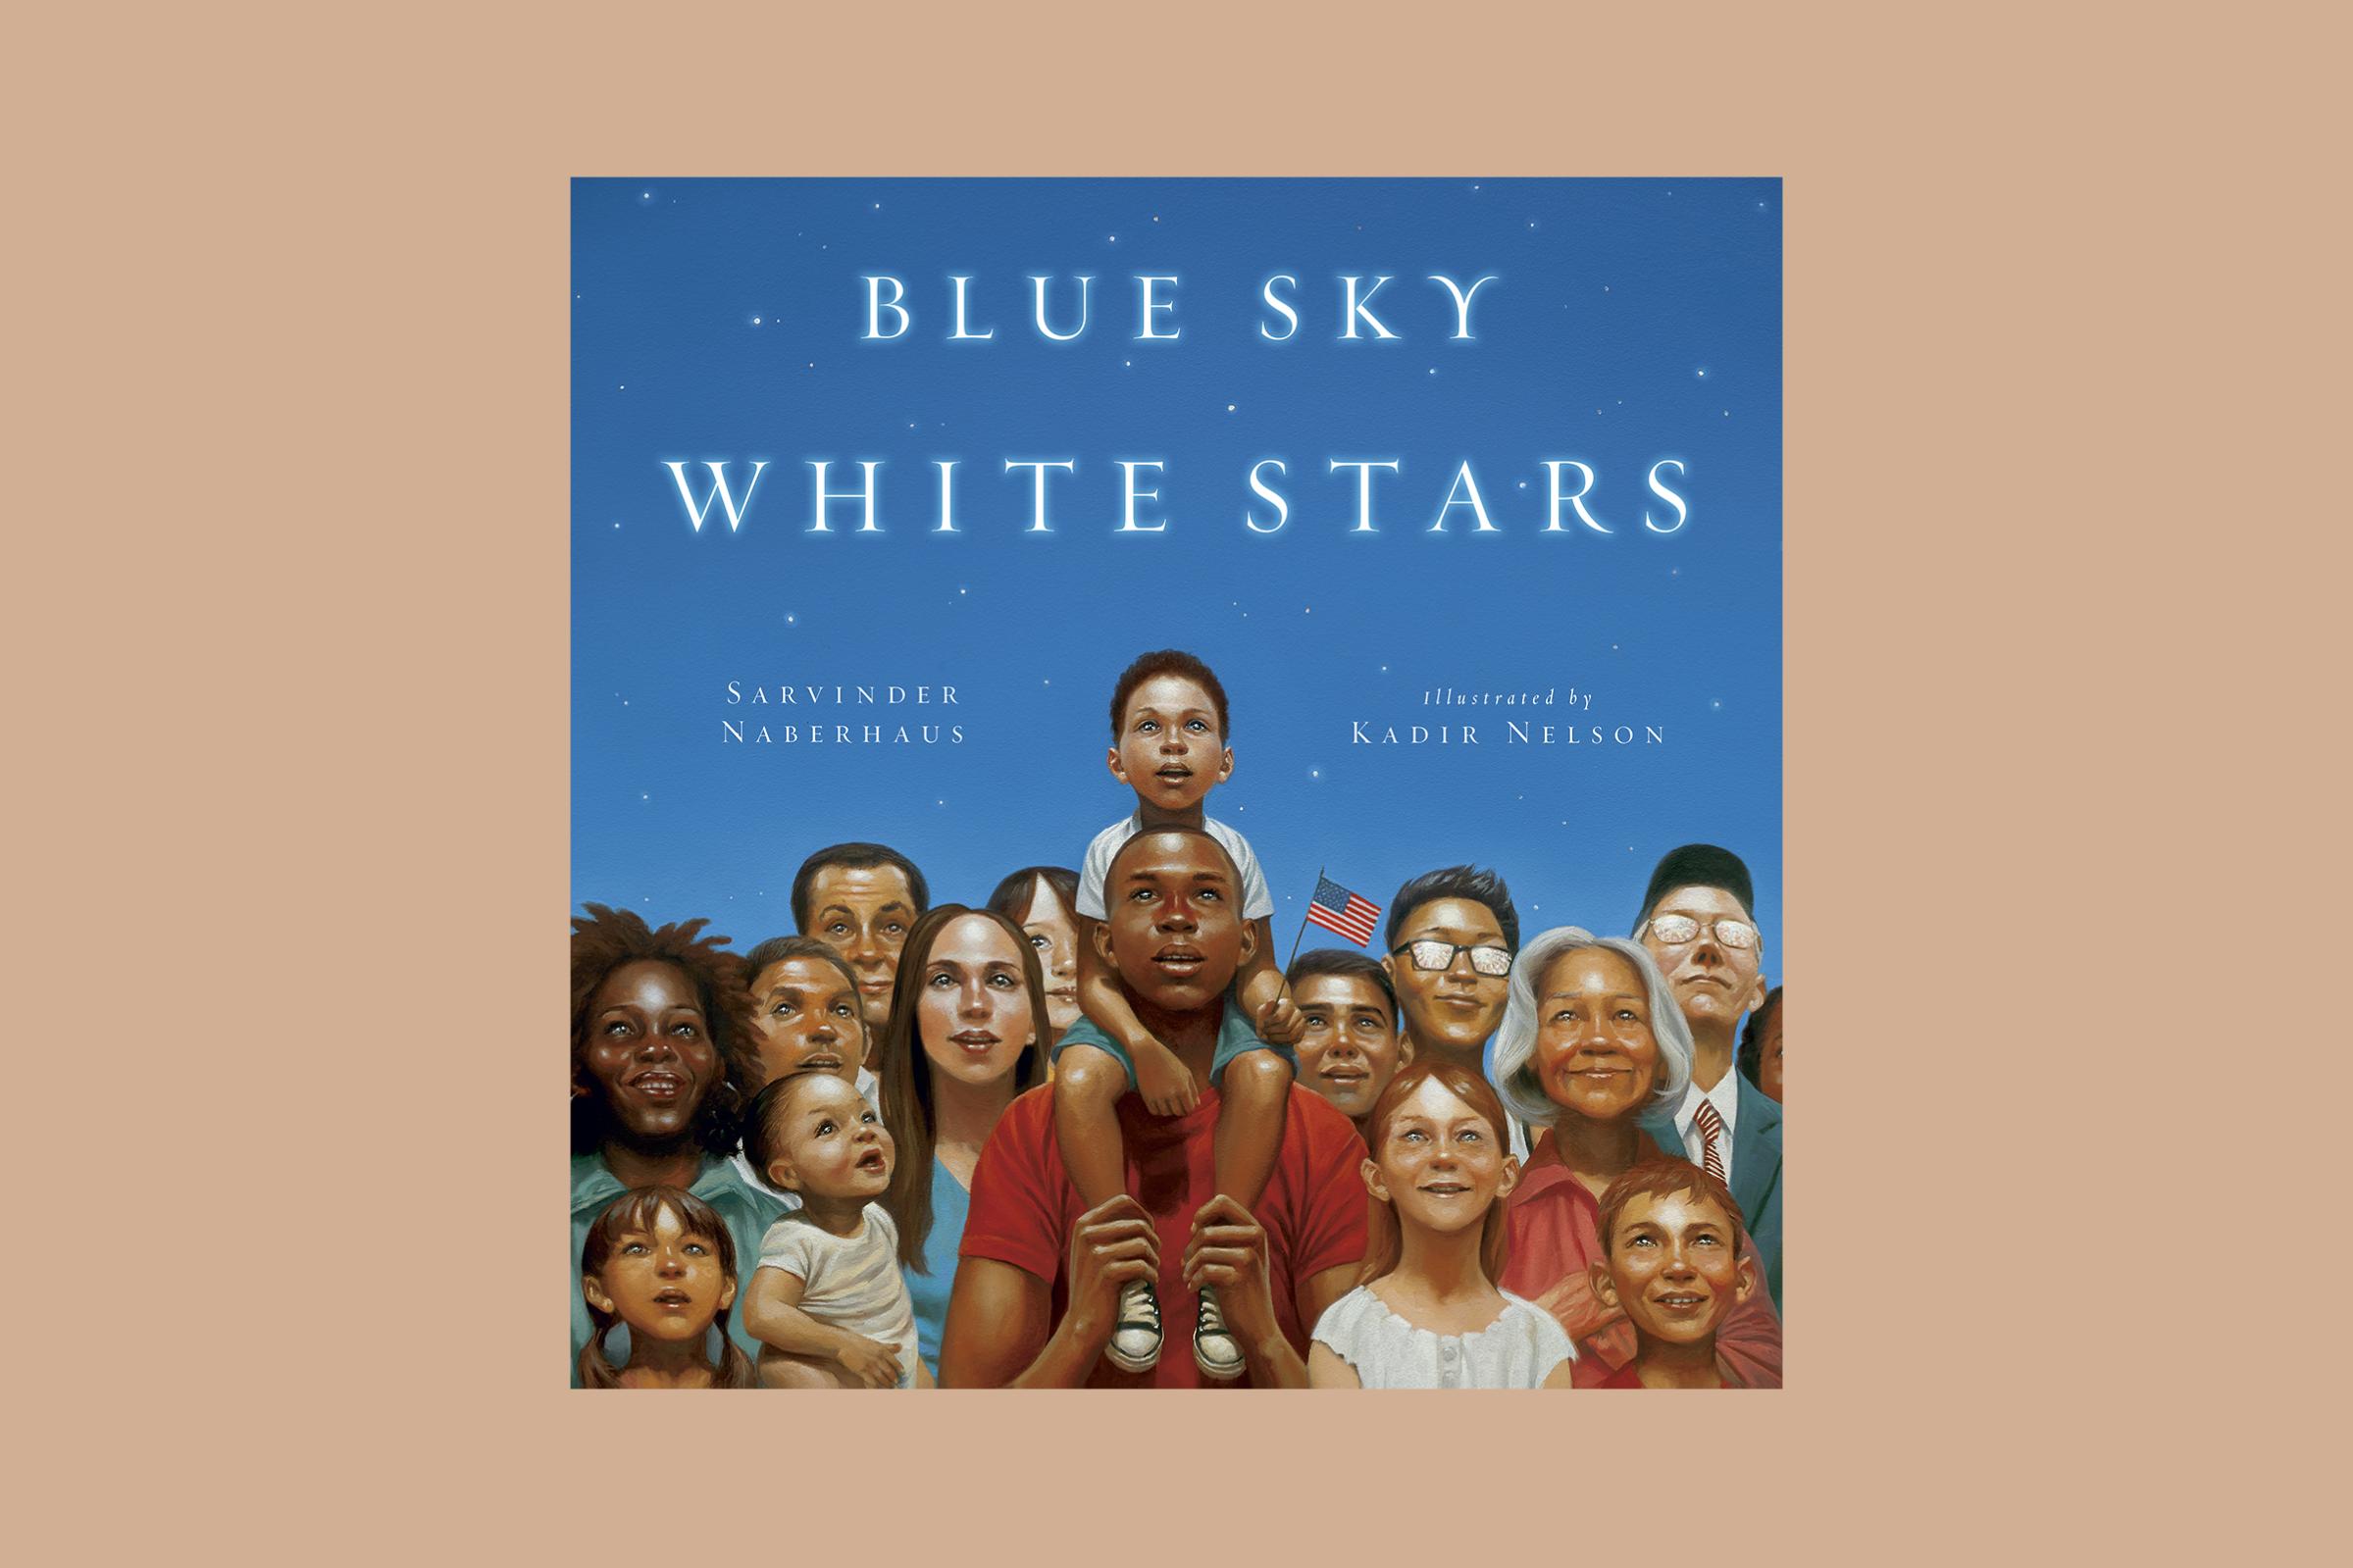 Blue Sky White Stars is one of the top 10 young adult books of 2017